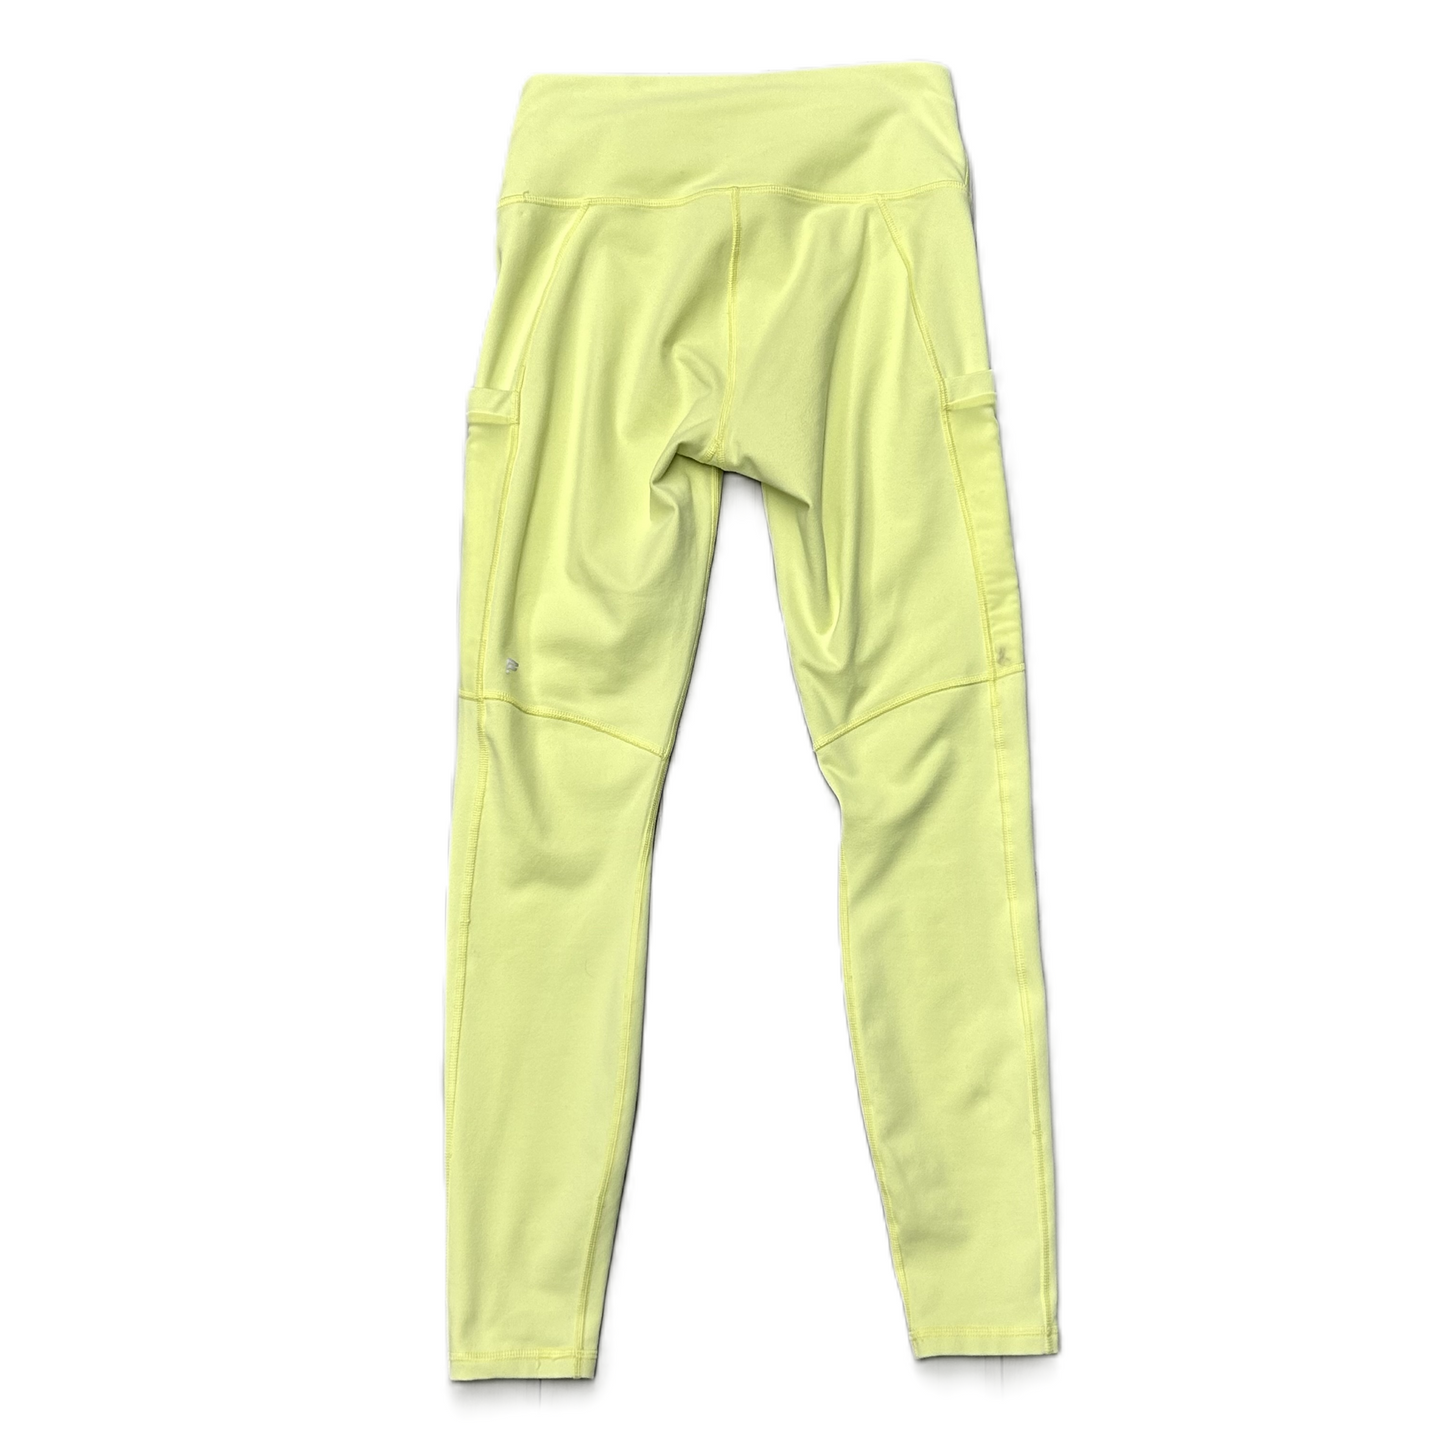 Yellow Athletic Leggings By Fabletics, Size: S